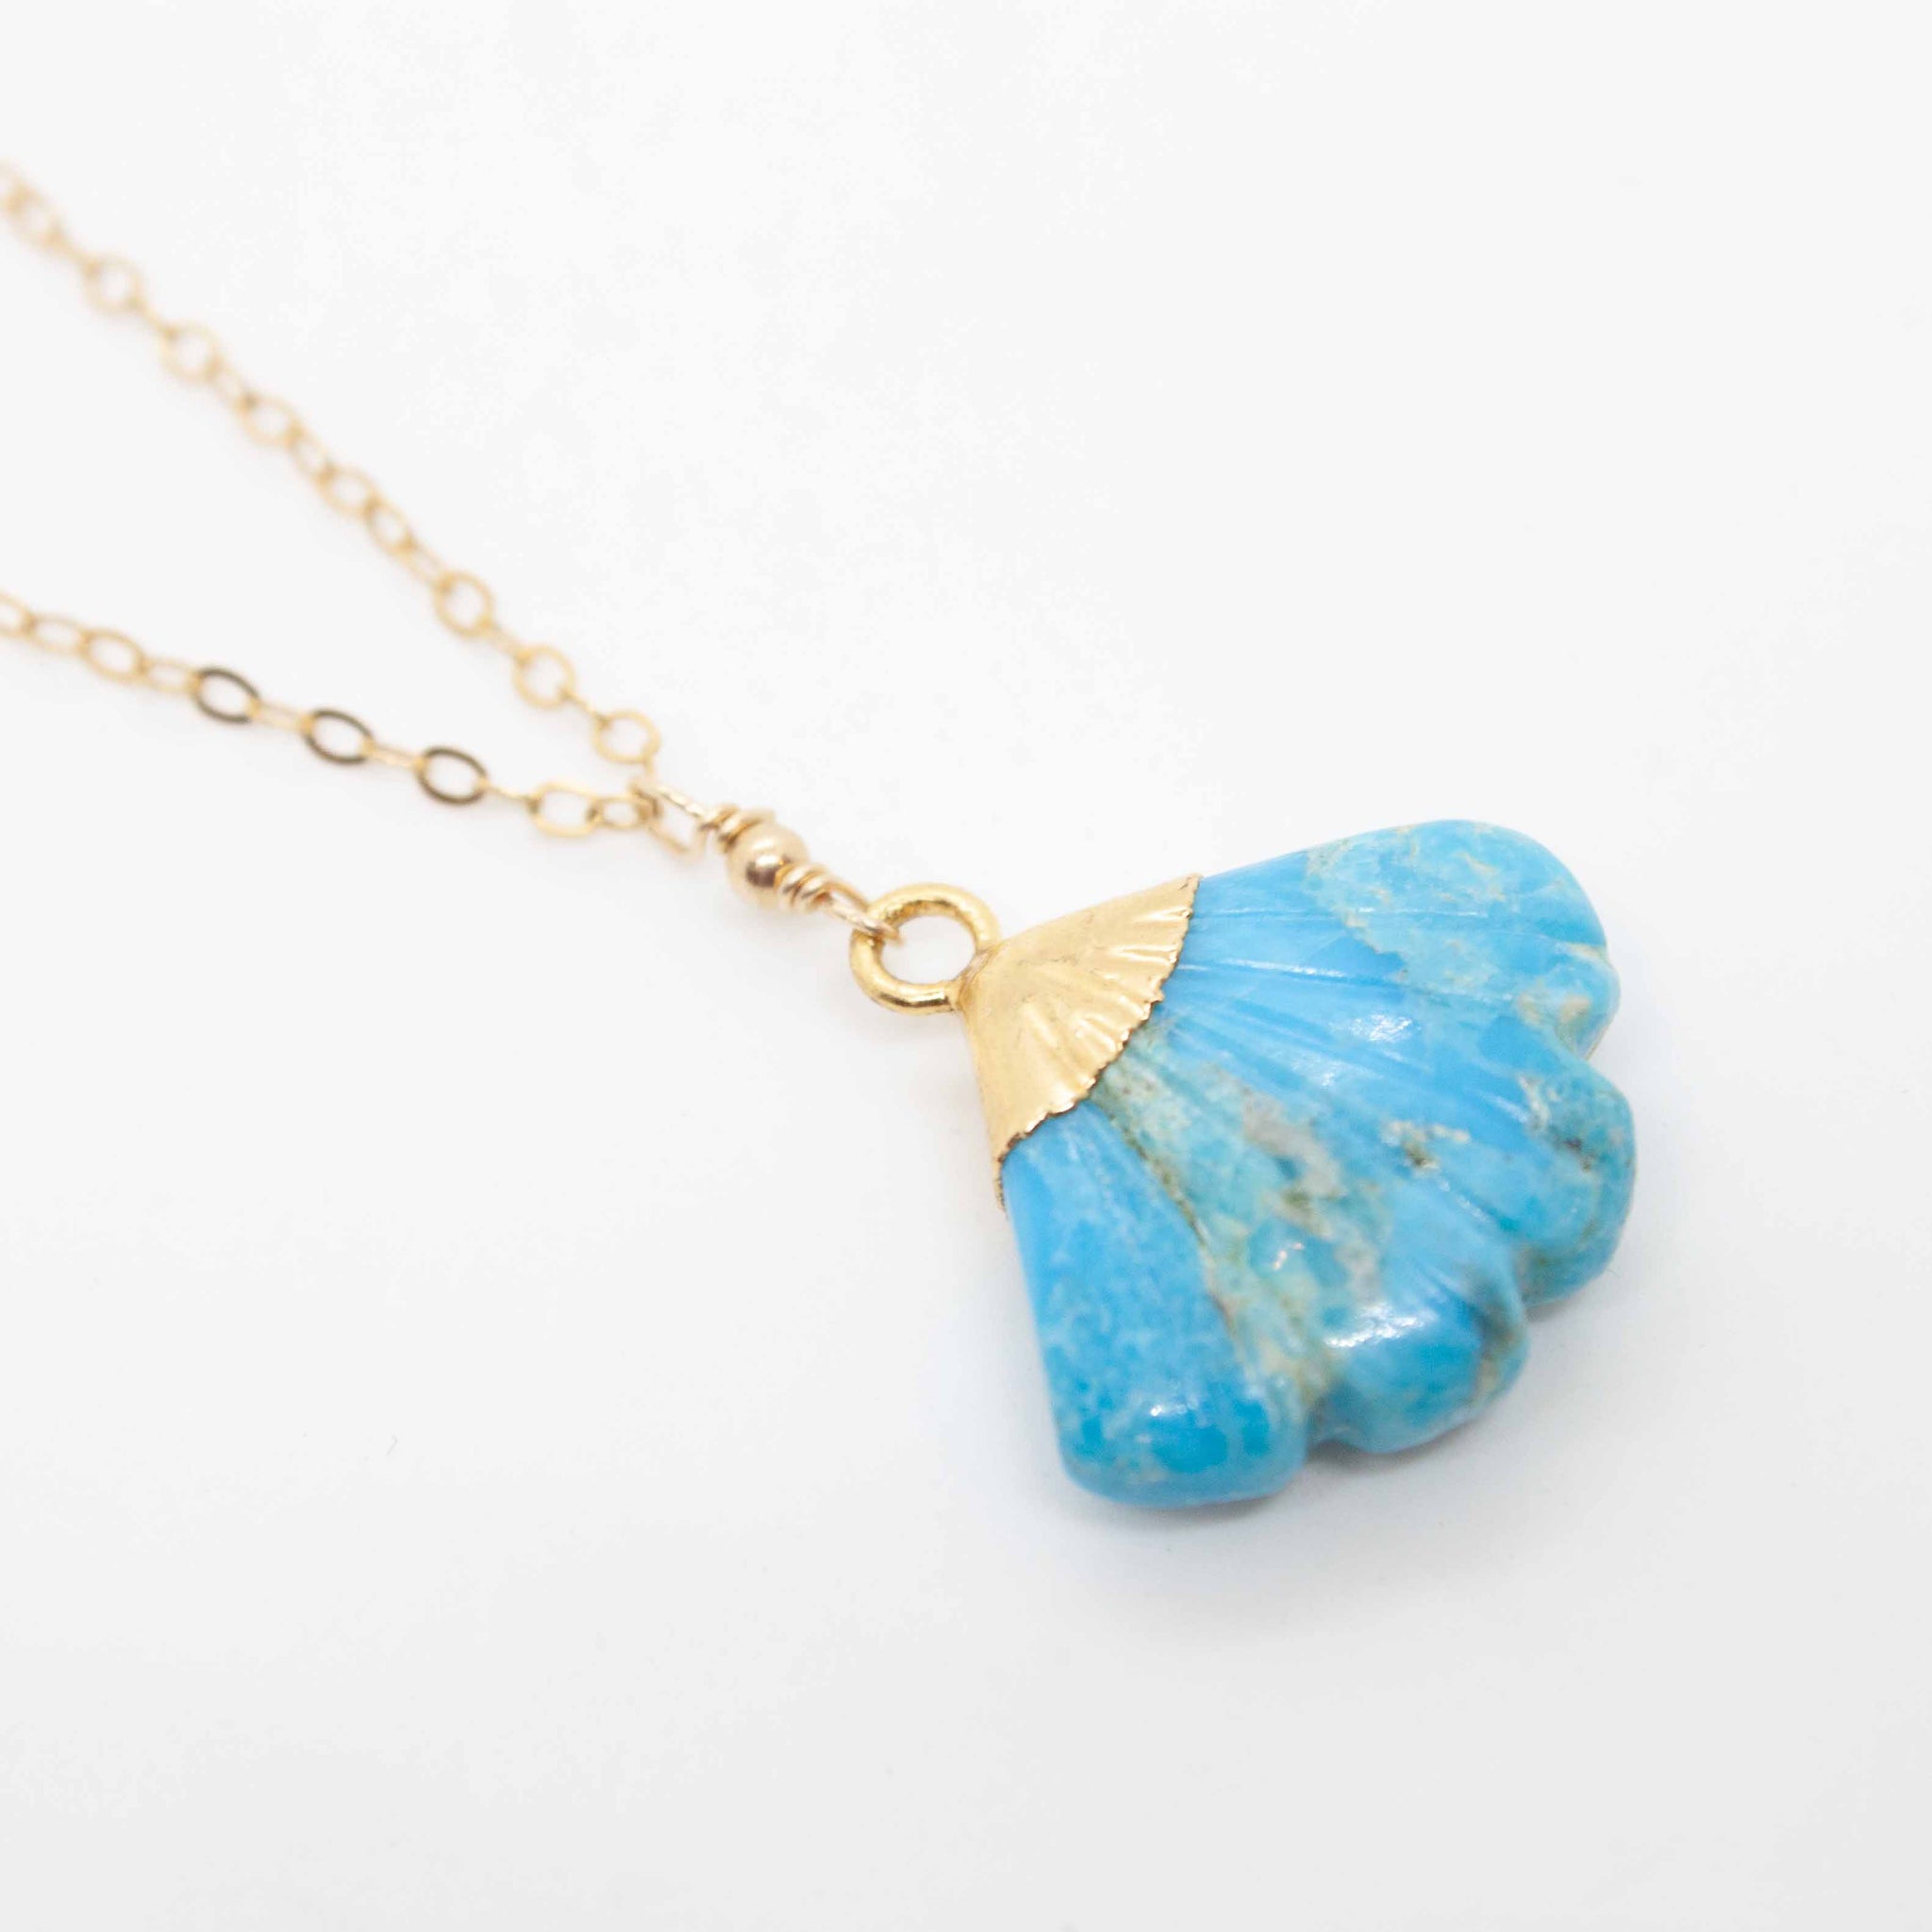 Add some pop to your summer whites with this uniquely shaped turquoise pendant! 18 inch gold filled necklace with 3/4 inch turquoise fan pendant. Handmade in Toronto by kp jewelry co.